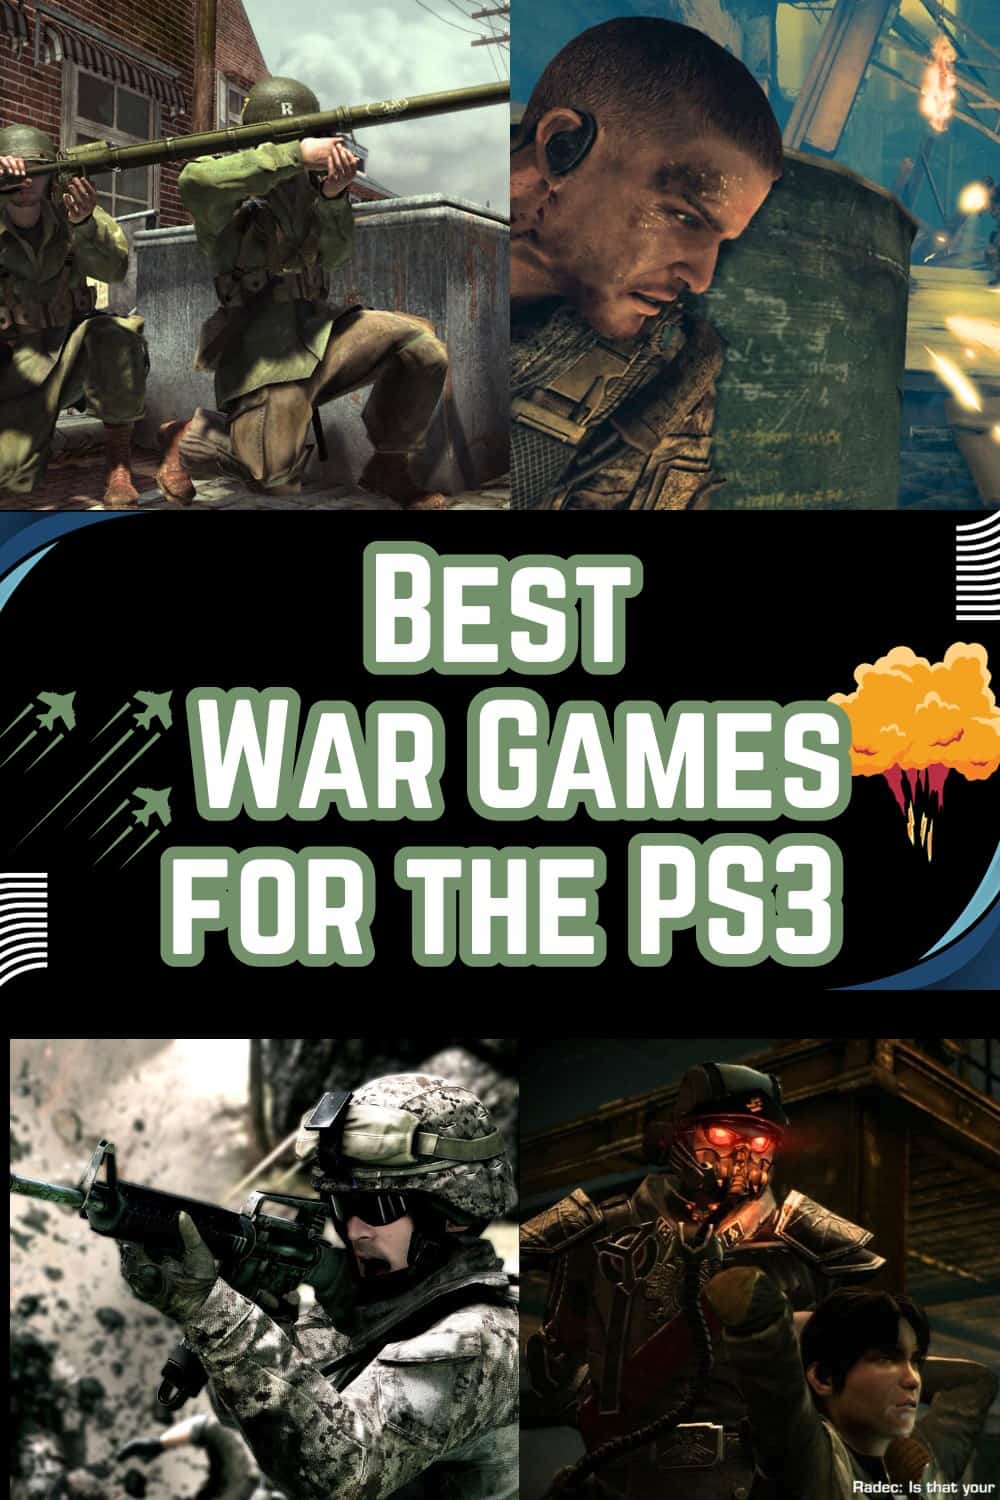 List of war games for the PS3